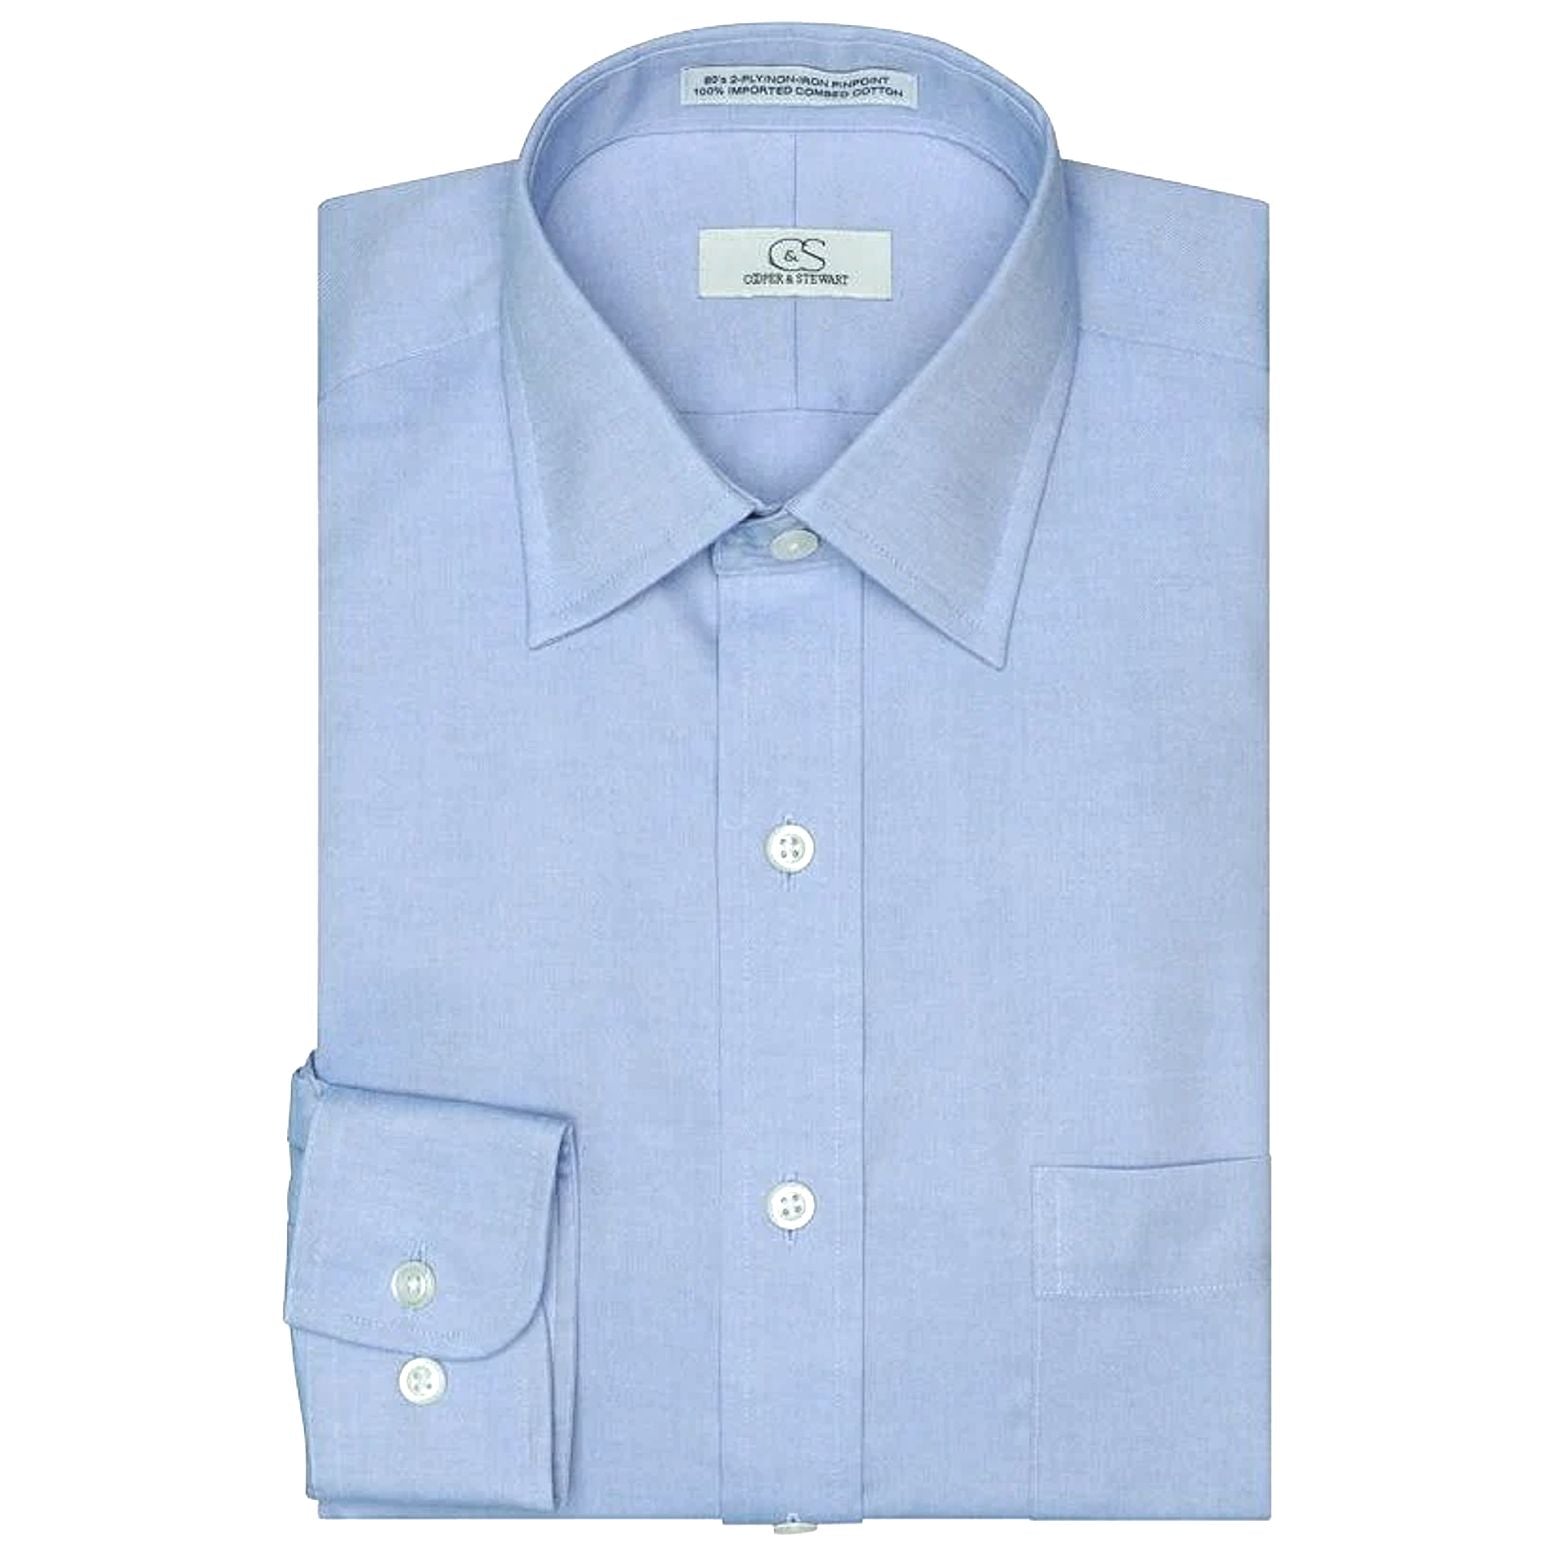 Oxford Dress Blue Cotton Wrinkle-Free - Pinpoint Shirt The by Classic